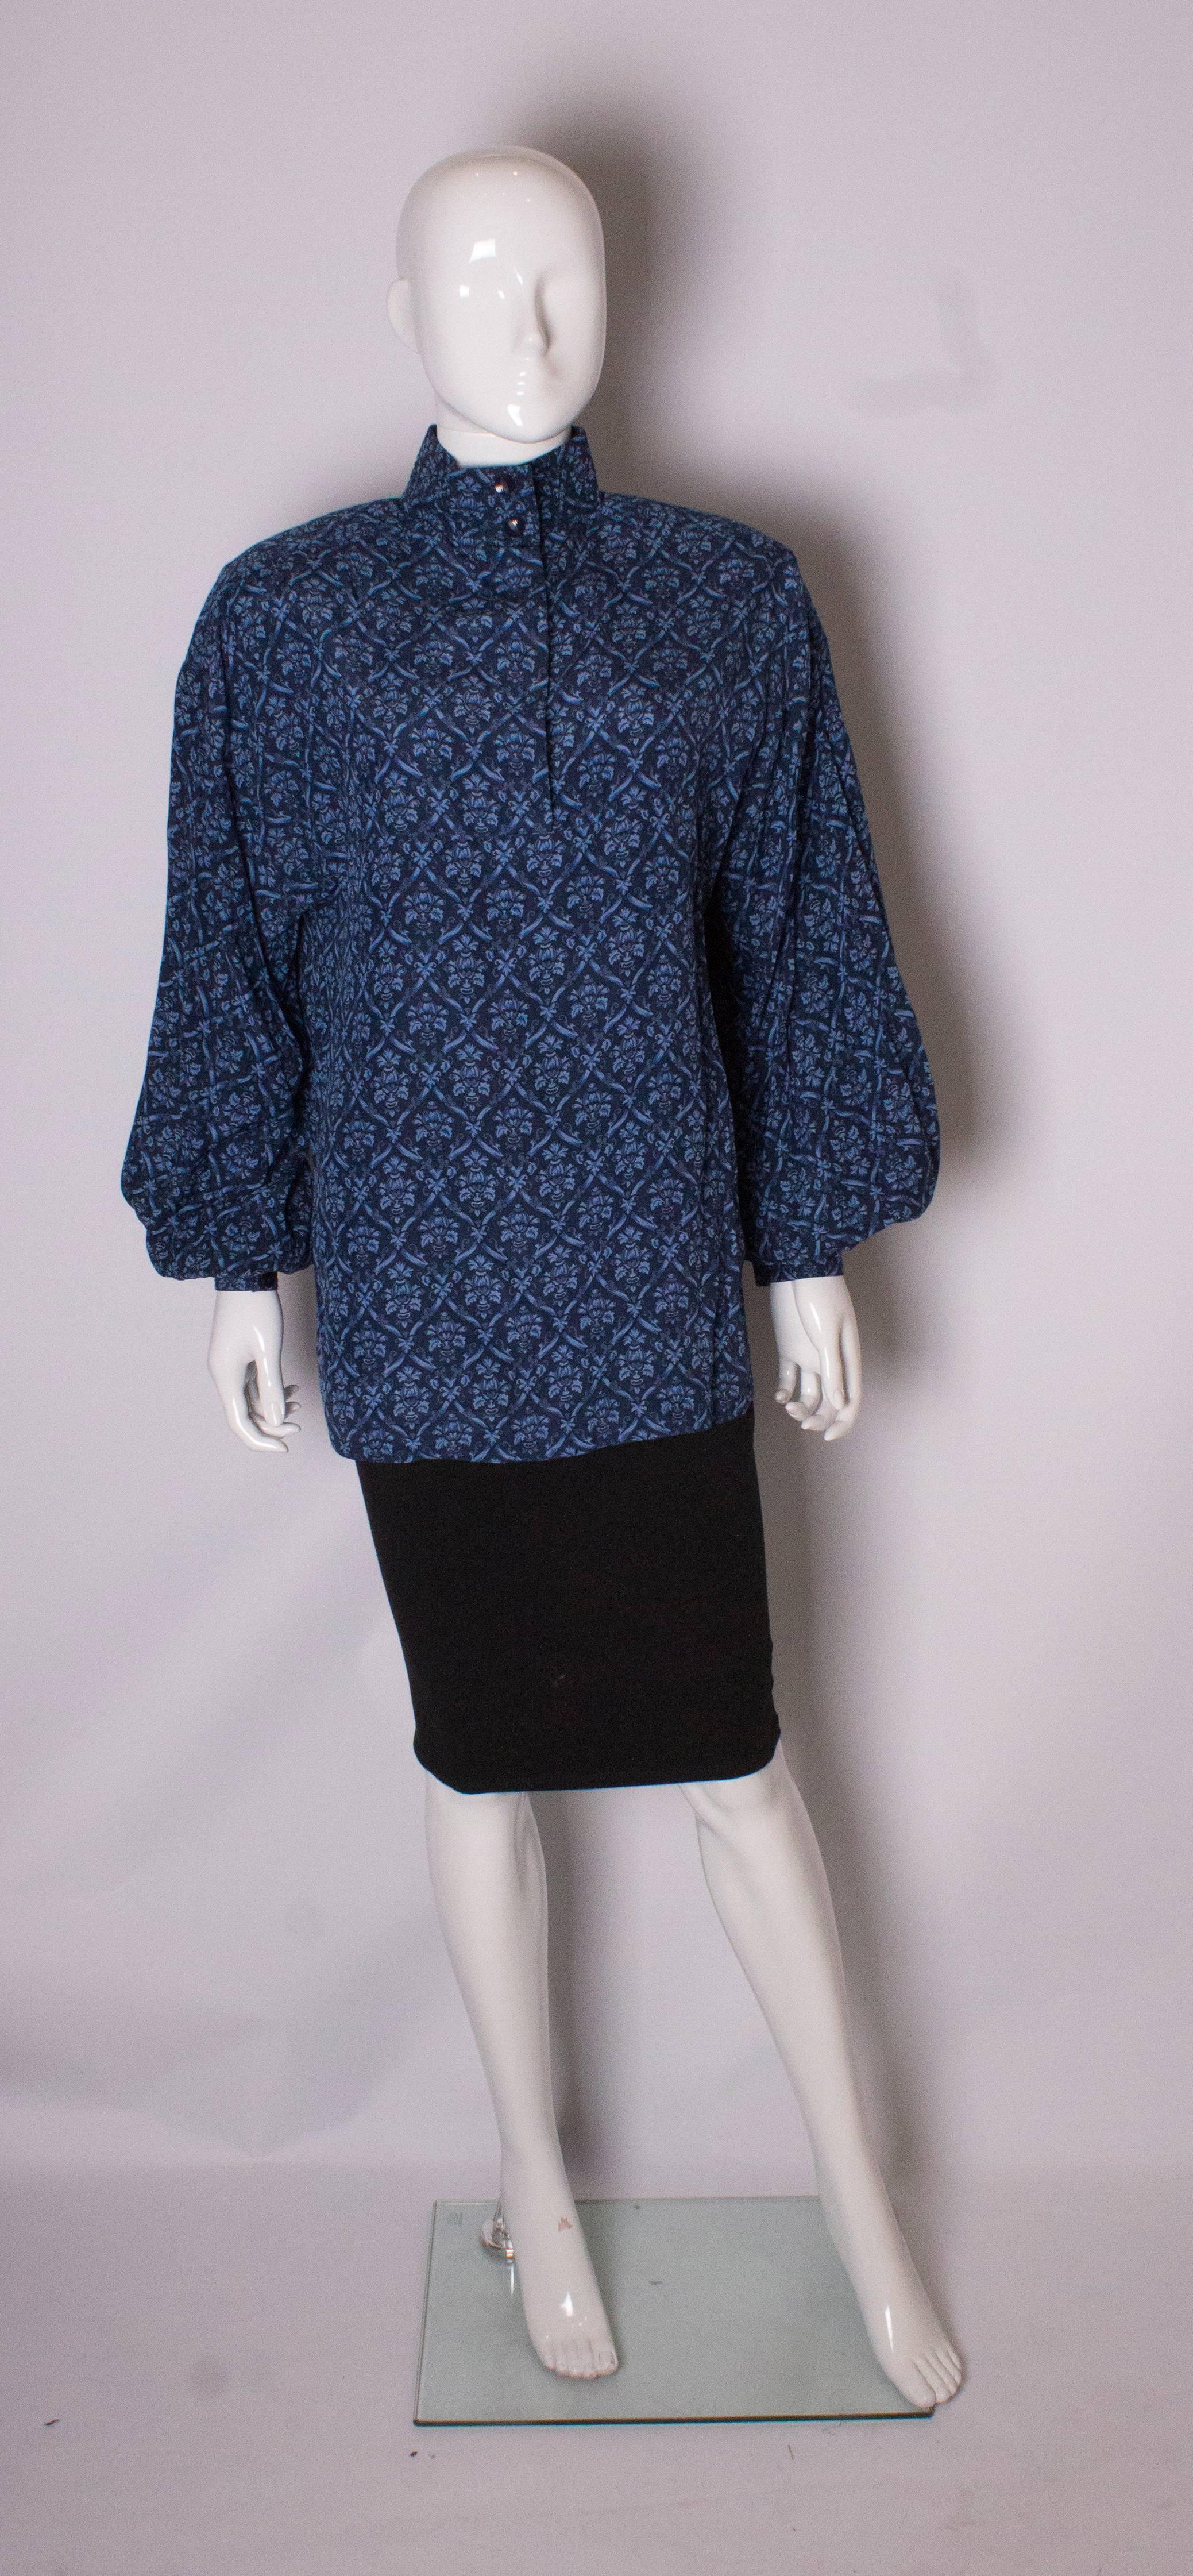 A chic silk blouse by Fendi. In a pretty pattern in several shades of blue, the  blouse has interesting stitch detail on the shoulders and collar. It has double button cuffs and a 5 button opening .Bust up to 44'', but it looks better worn loose.